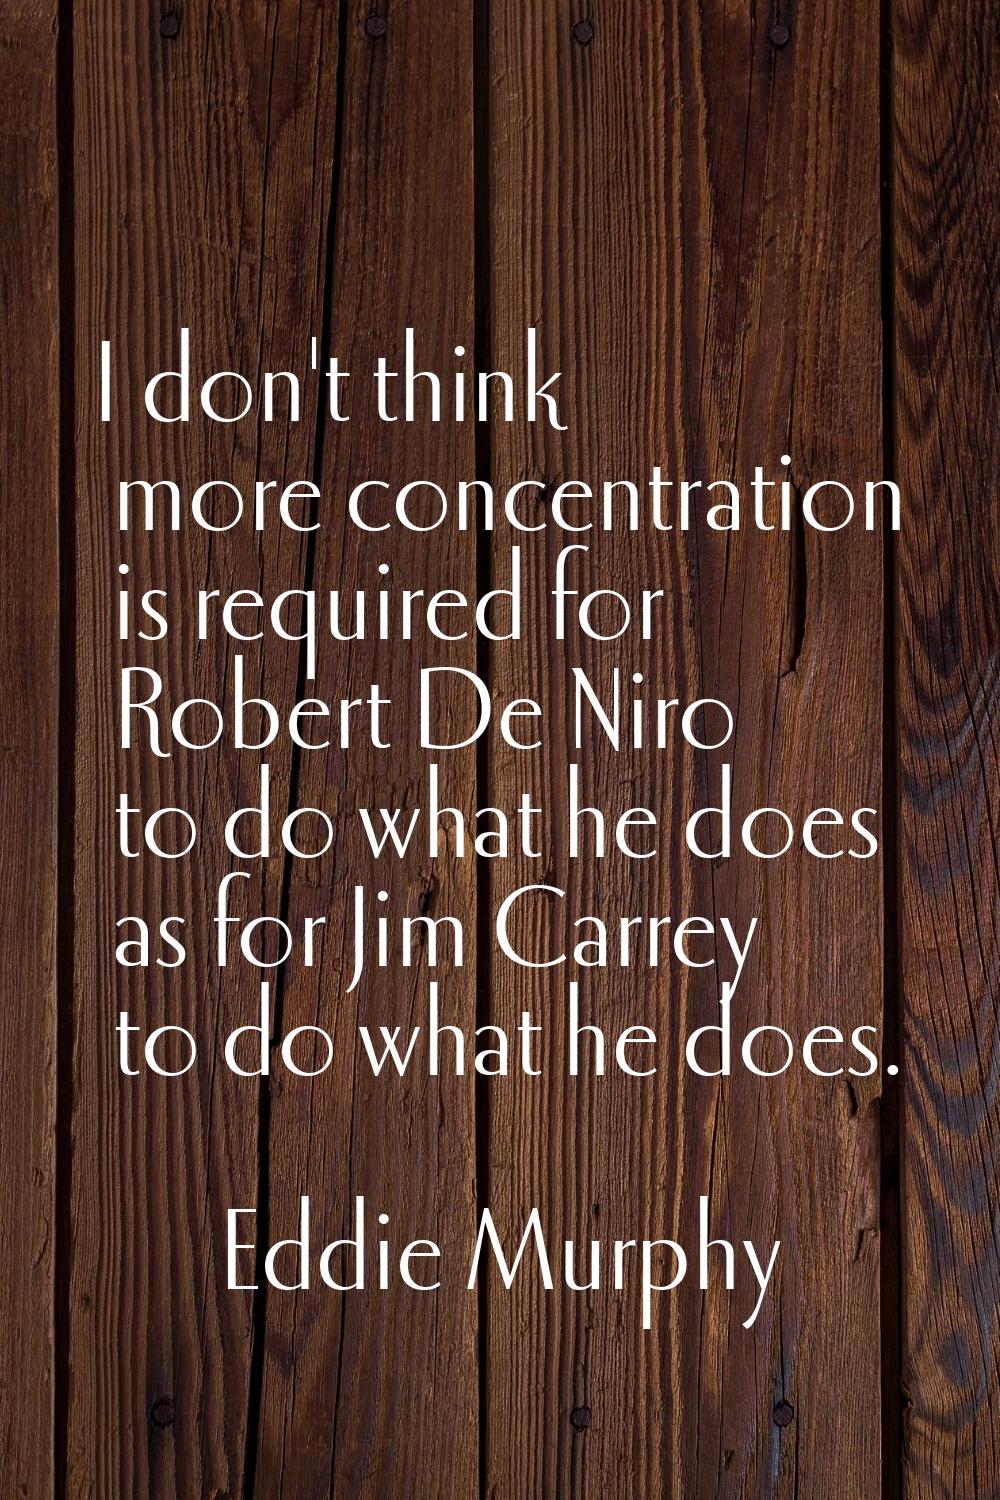 I don't think more concentration is required for Robert De Niro to do what he does as for Jim Carre